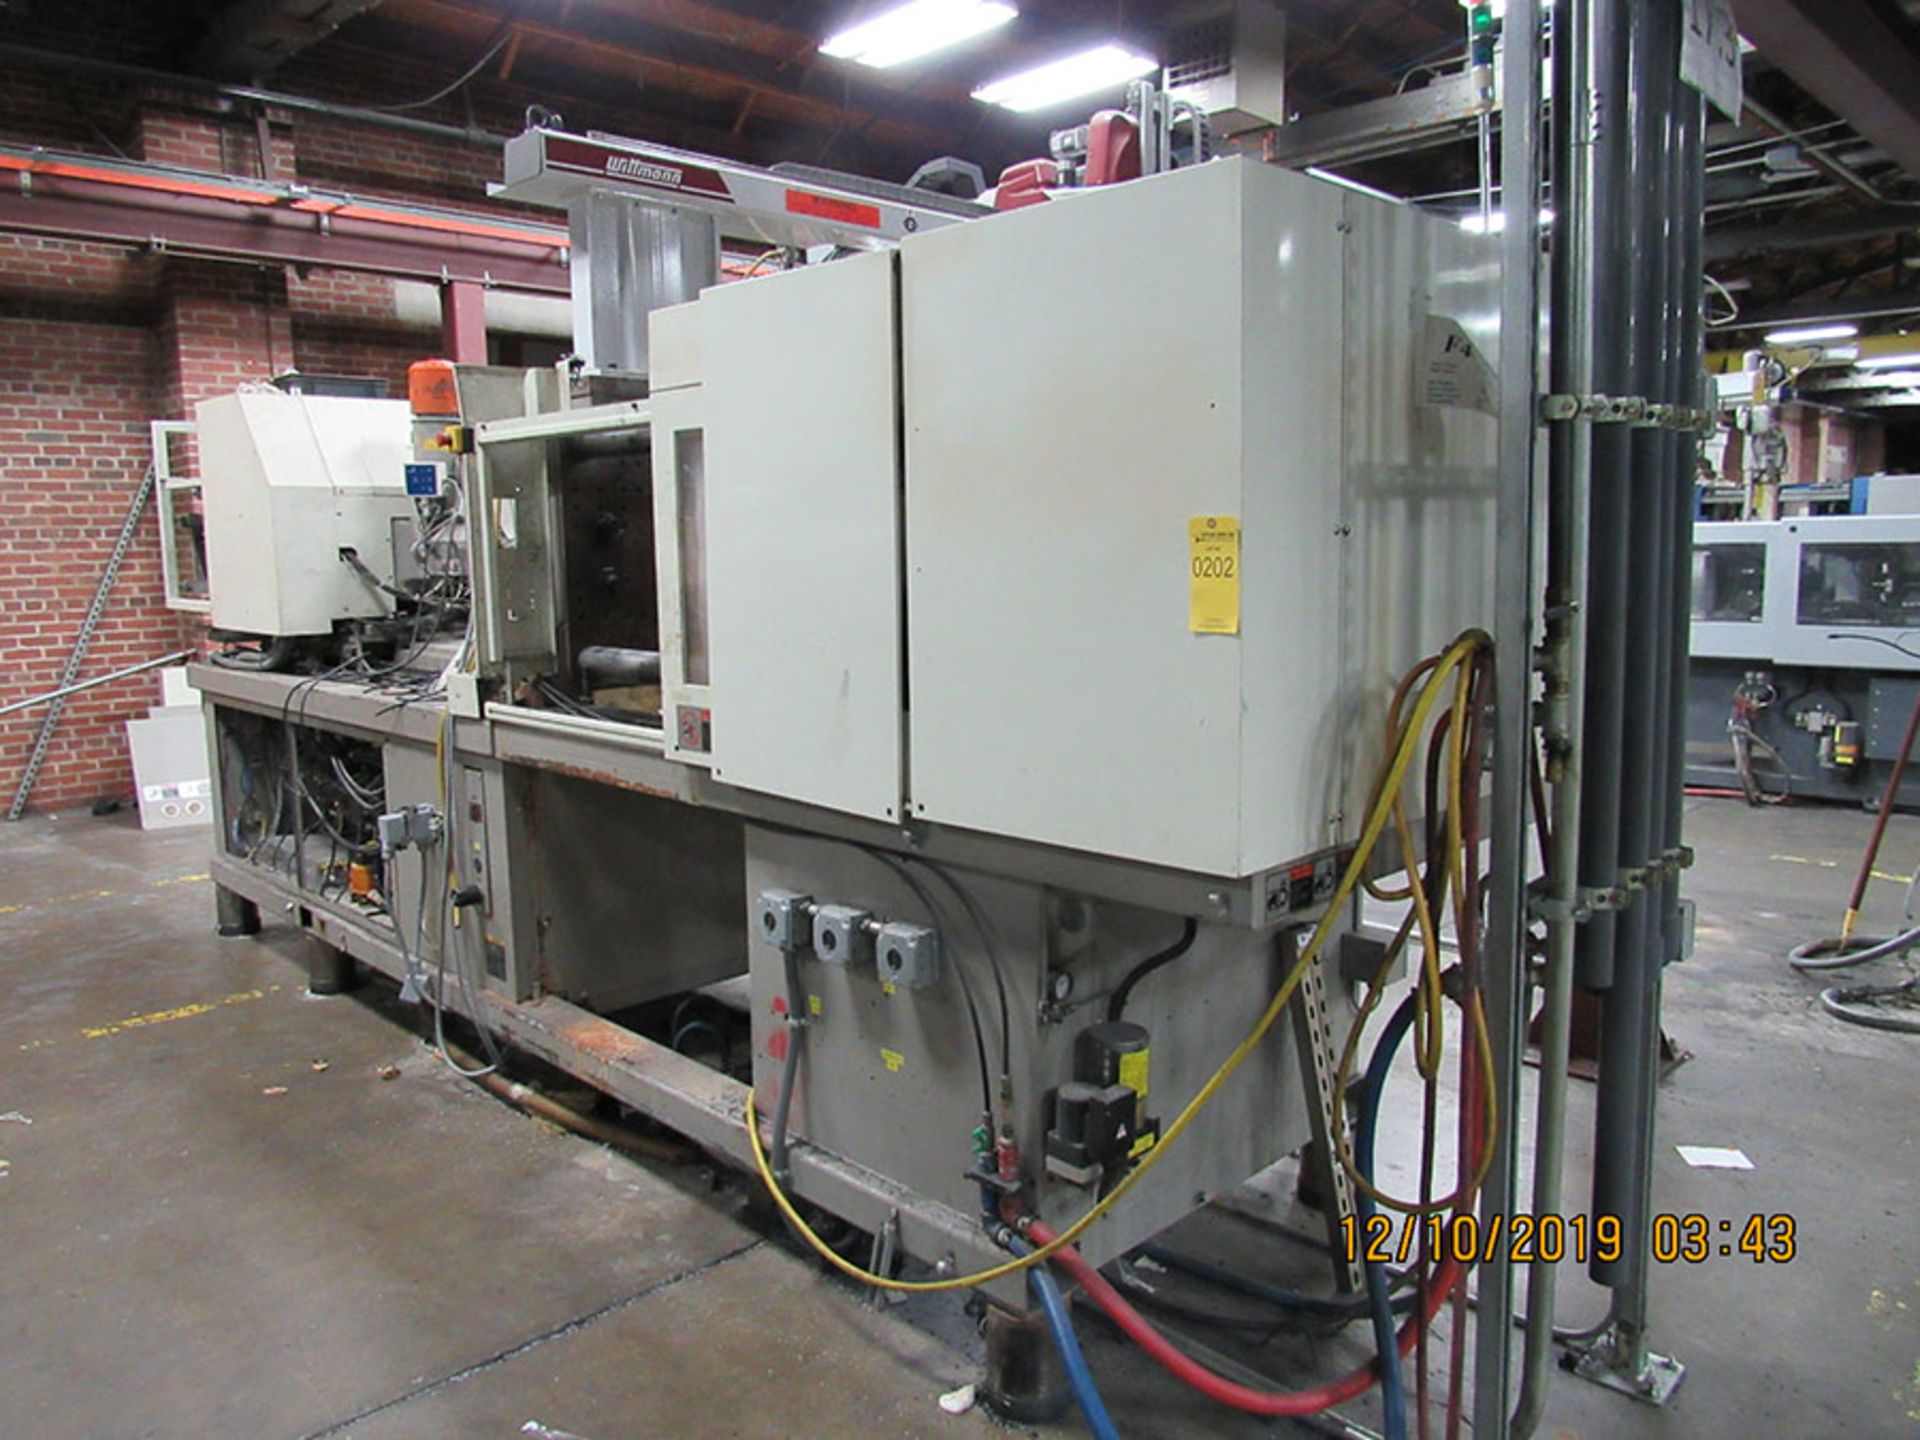 TOSHIBA EC 180V21-6A PLASTIC INJECTION MOLDING MACHINE; NEW IN 2002, S/N 227610, ALL ELECTRIC,